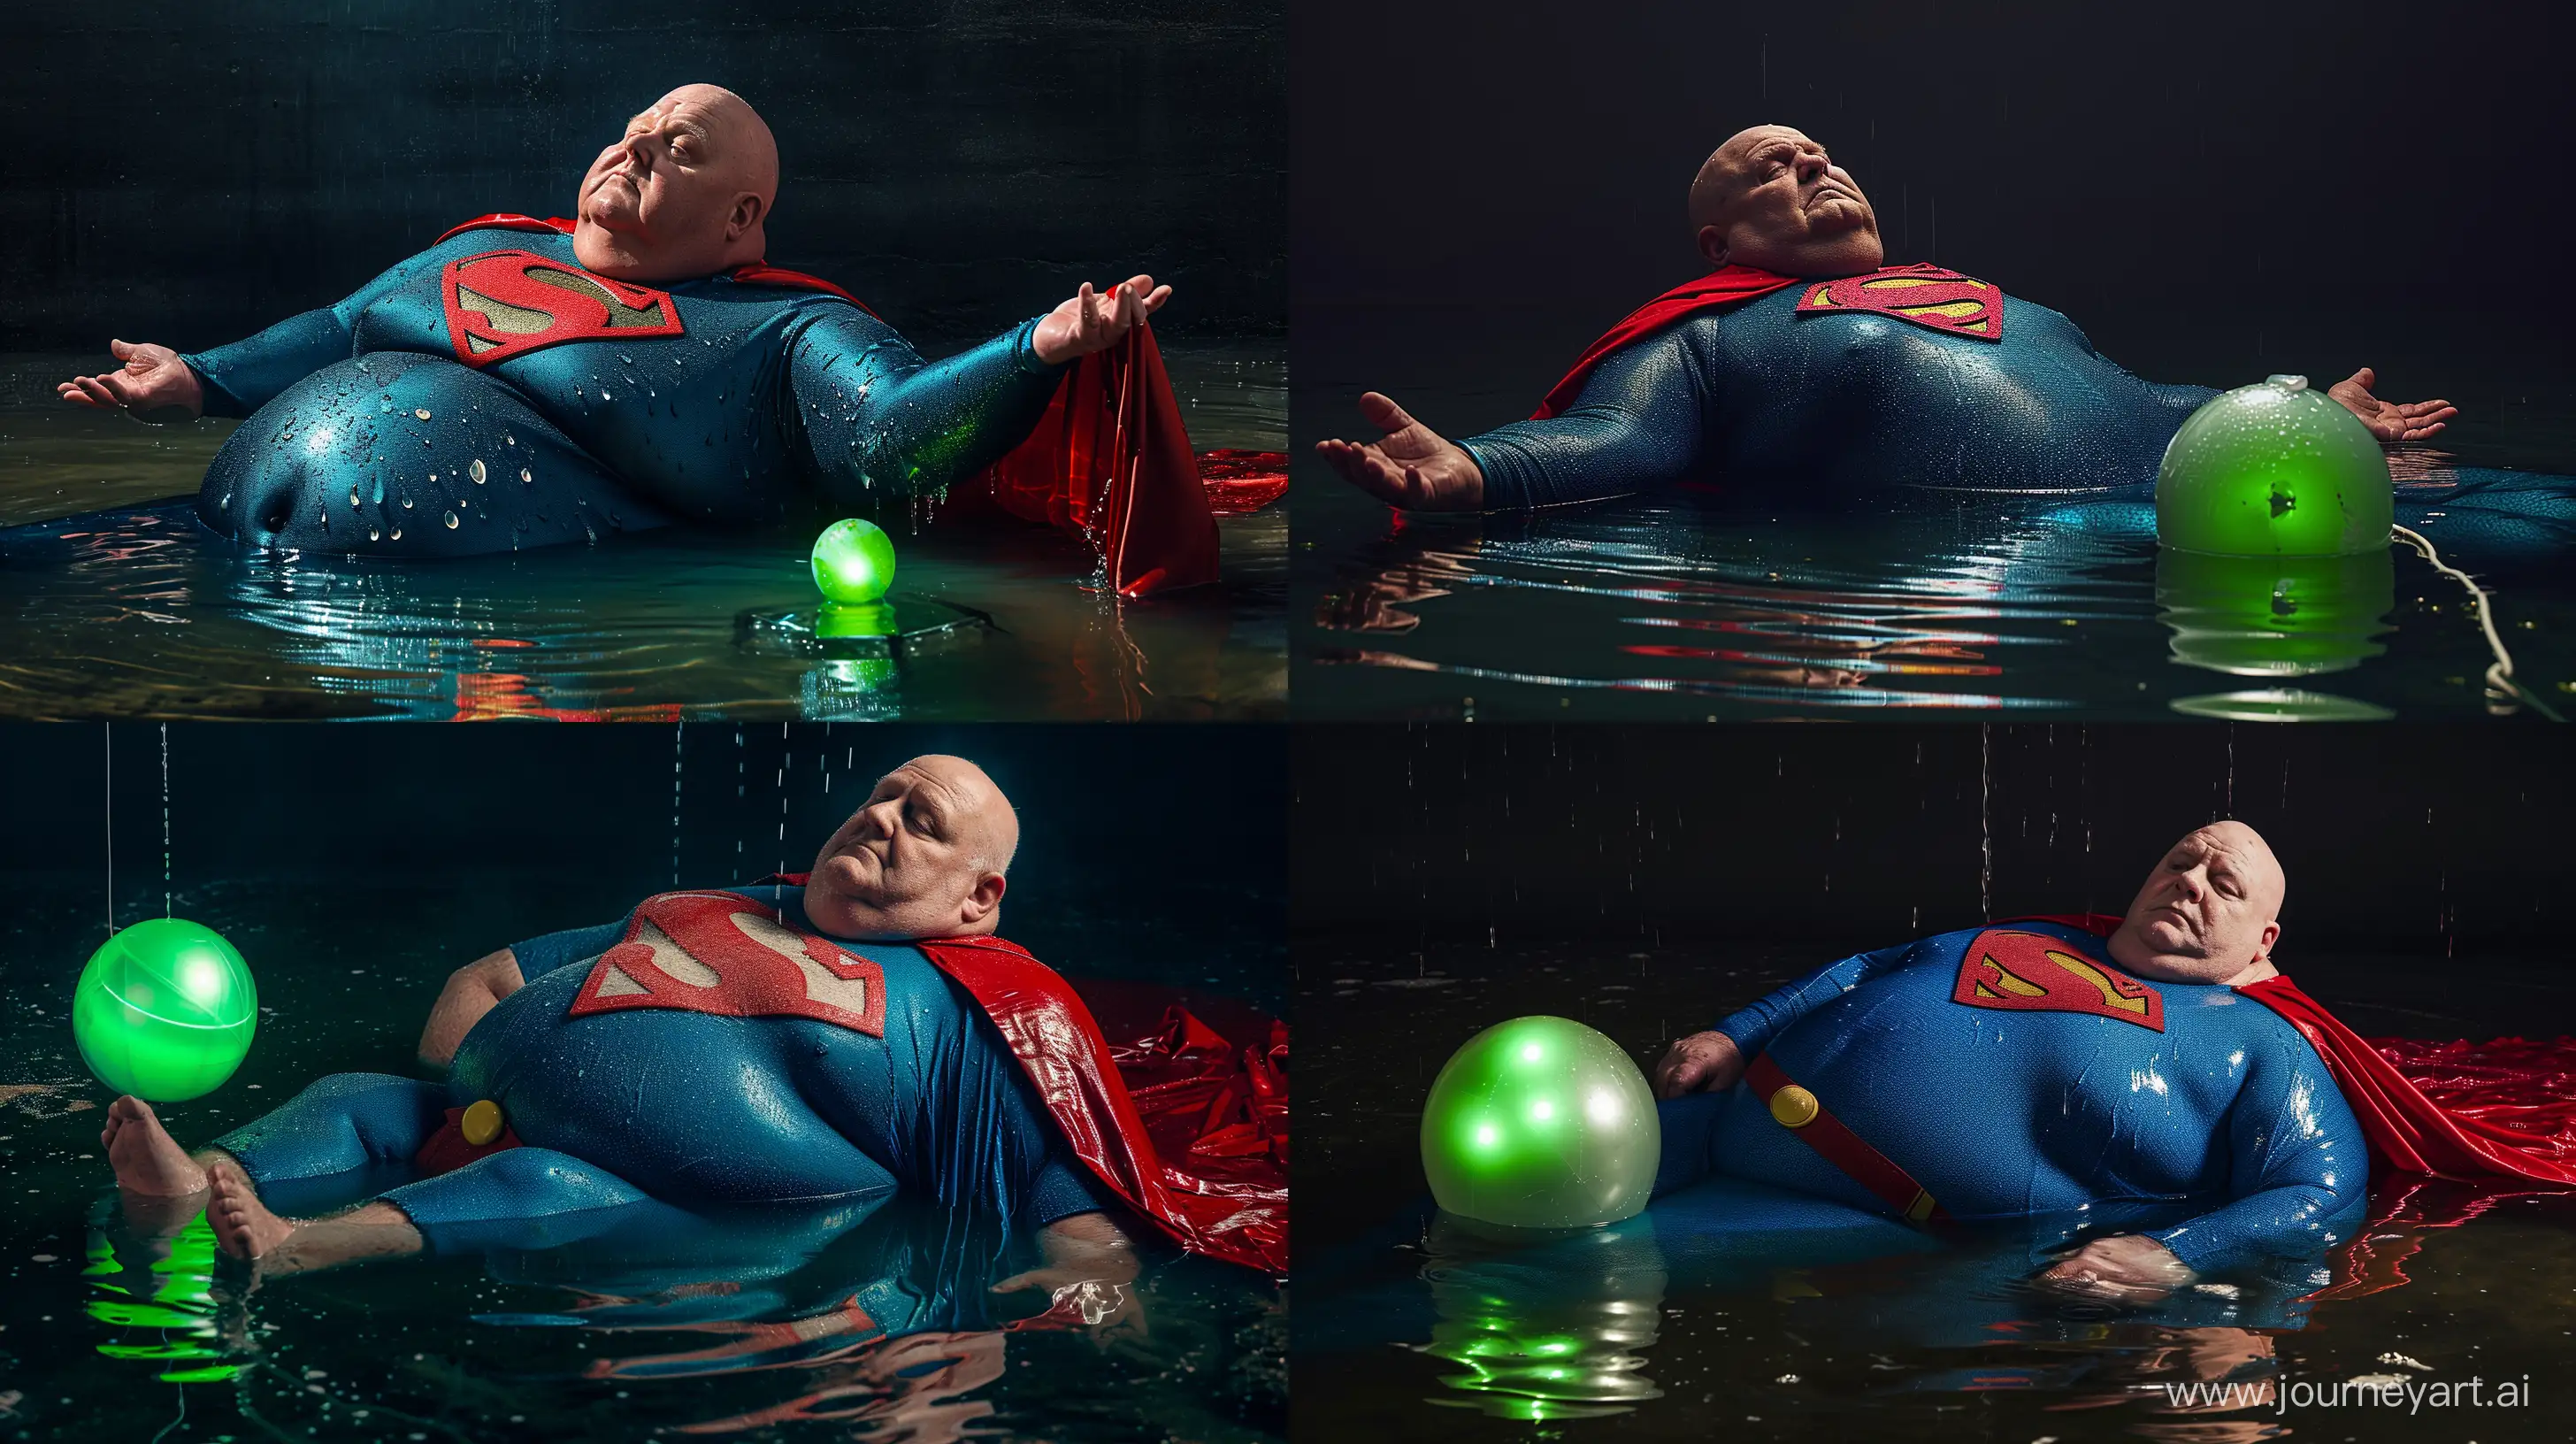 chubby man aged 70 lying in water, small green illuminated ball, wet tight blue spandex superman costume, red cape, clean shaven, bald, sharp-focus, high-quality, award-winning photograph, Canon EOS 5D Mark IV DSLR, professional lighting setup, Adobe Photoshop --ar 16:9 --v 6